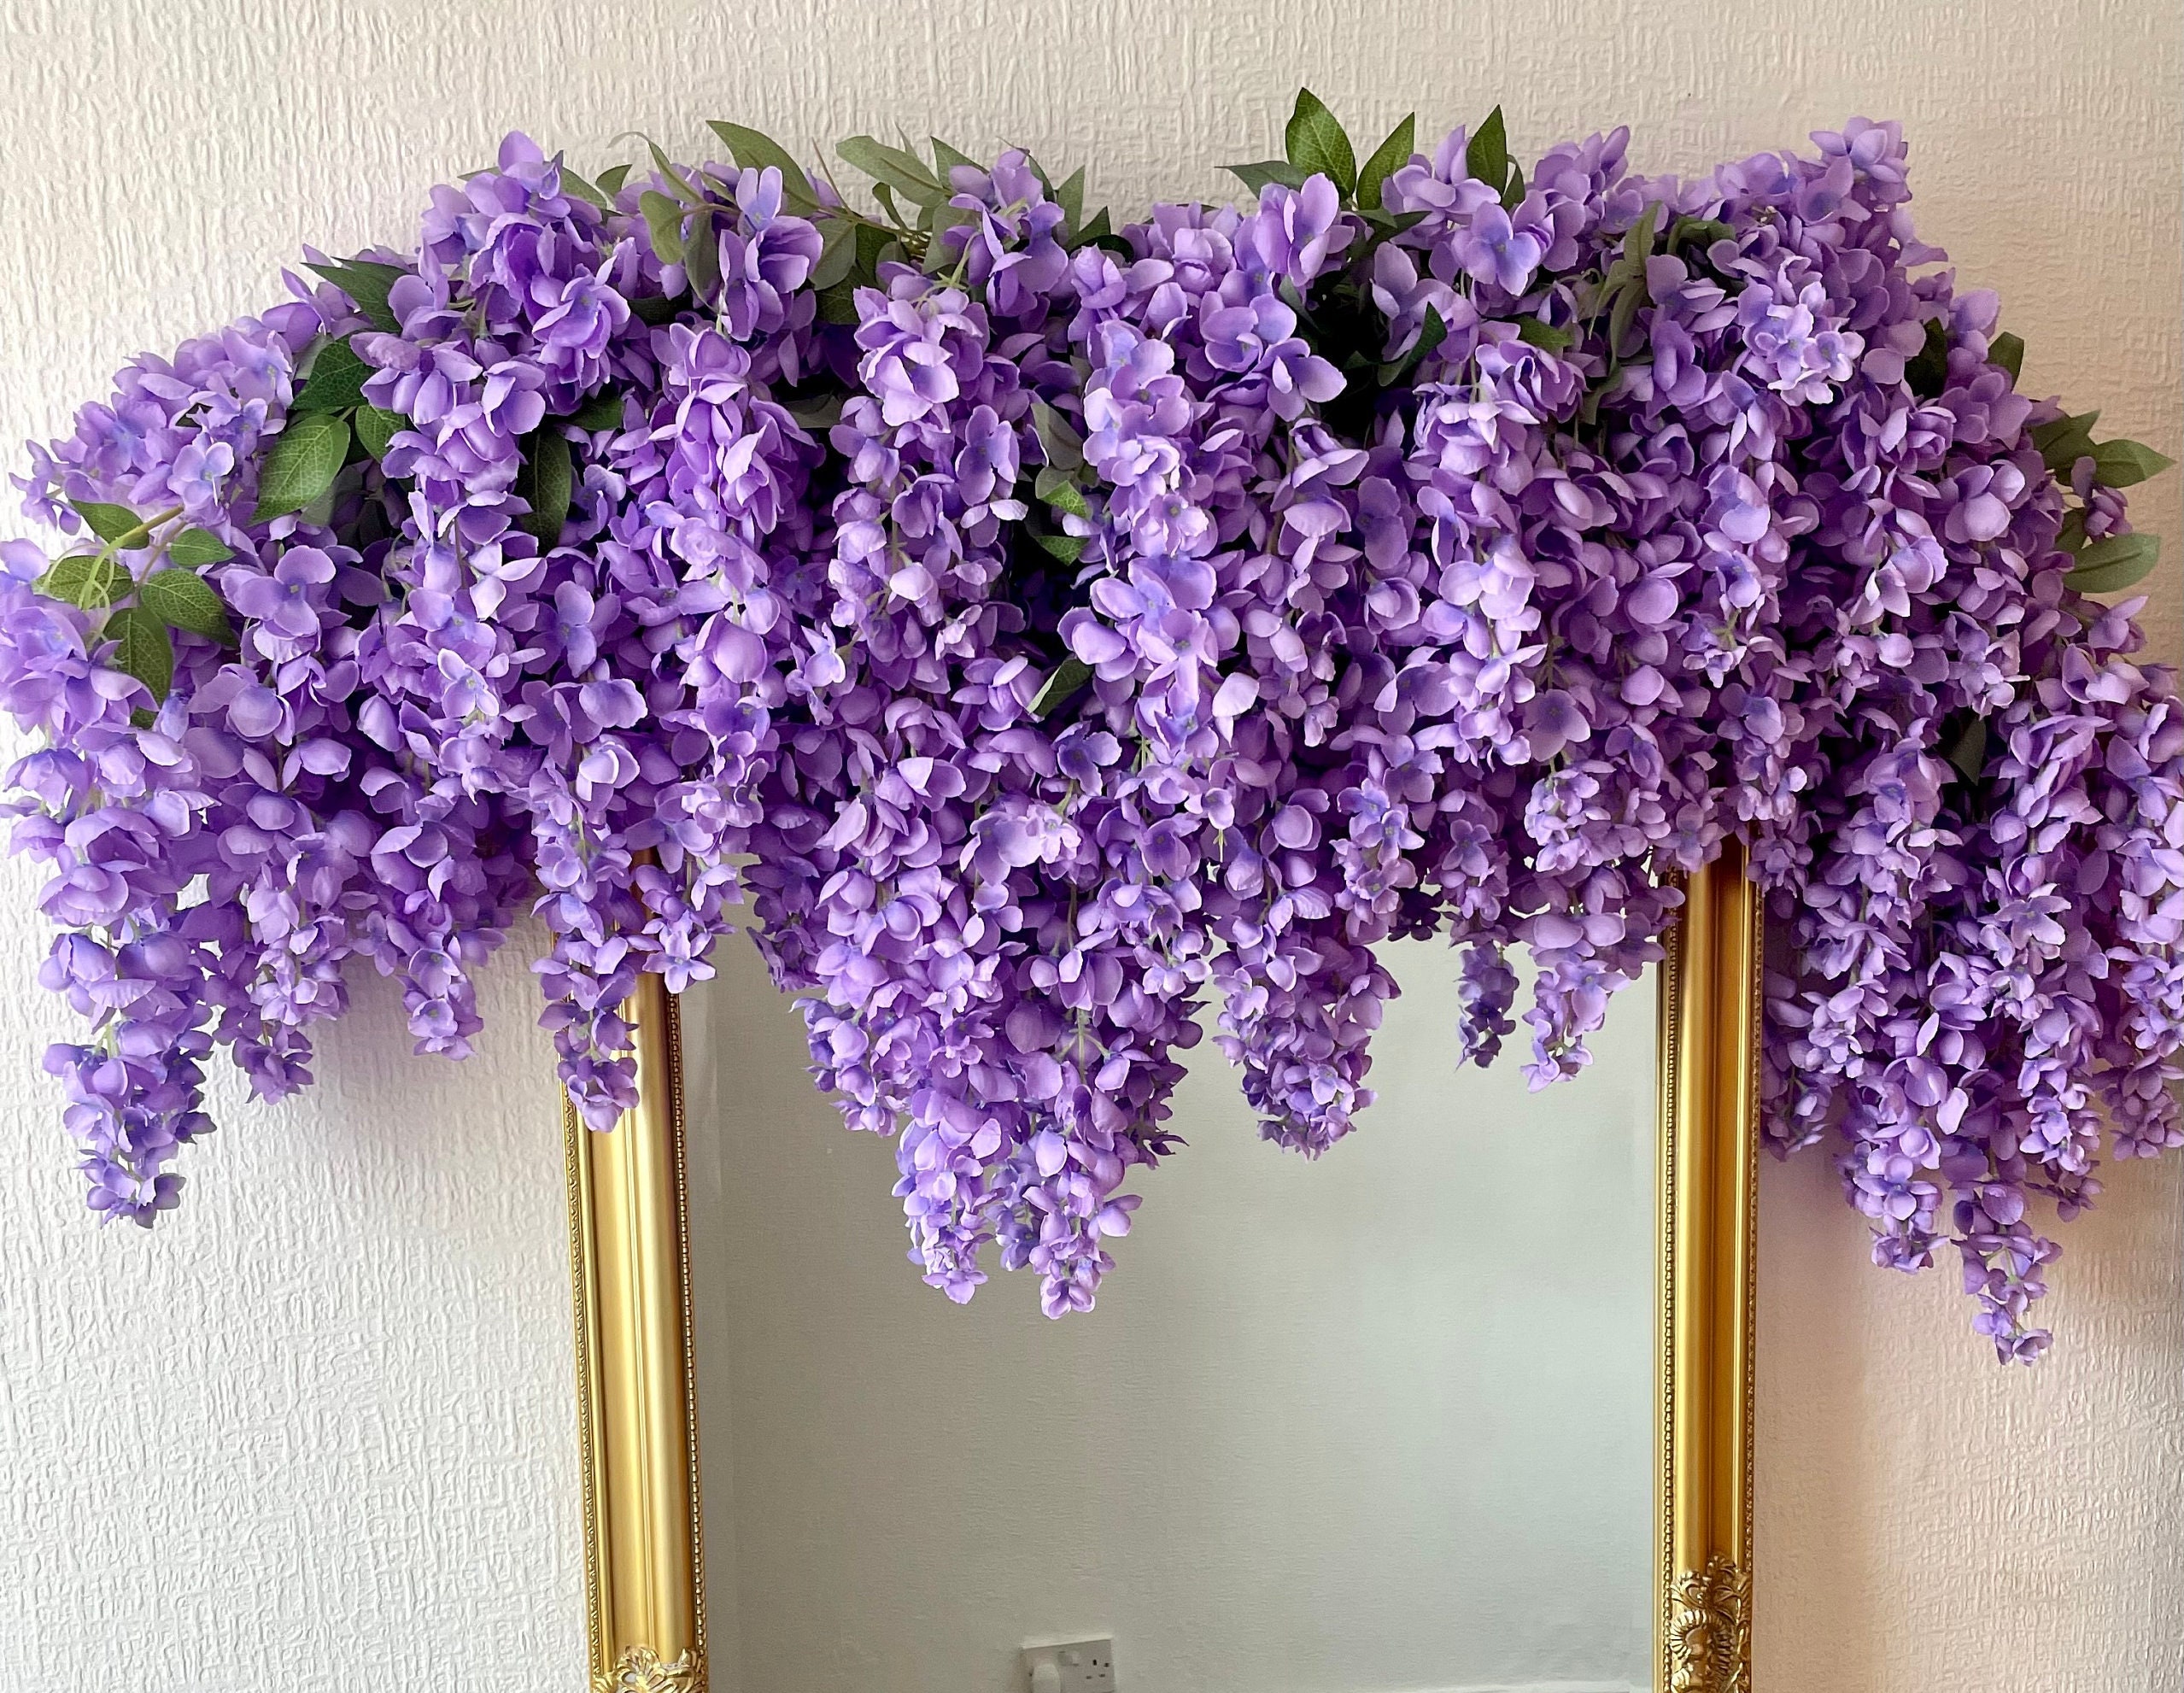 Wiueurtly Wisteria Artificial Flowers Garland Winter Flowers Artificial Hand Tied Flower Bouquet 5 Peonies North American European Style Garden Home